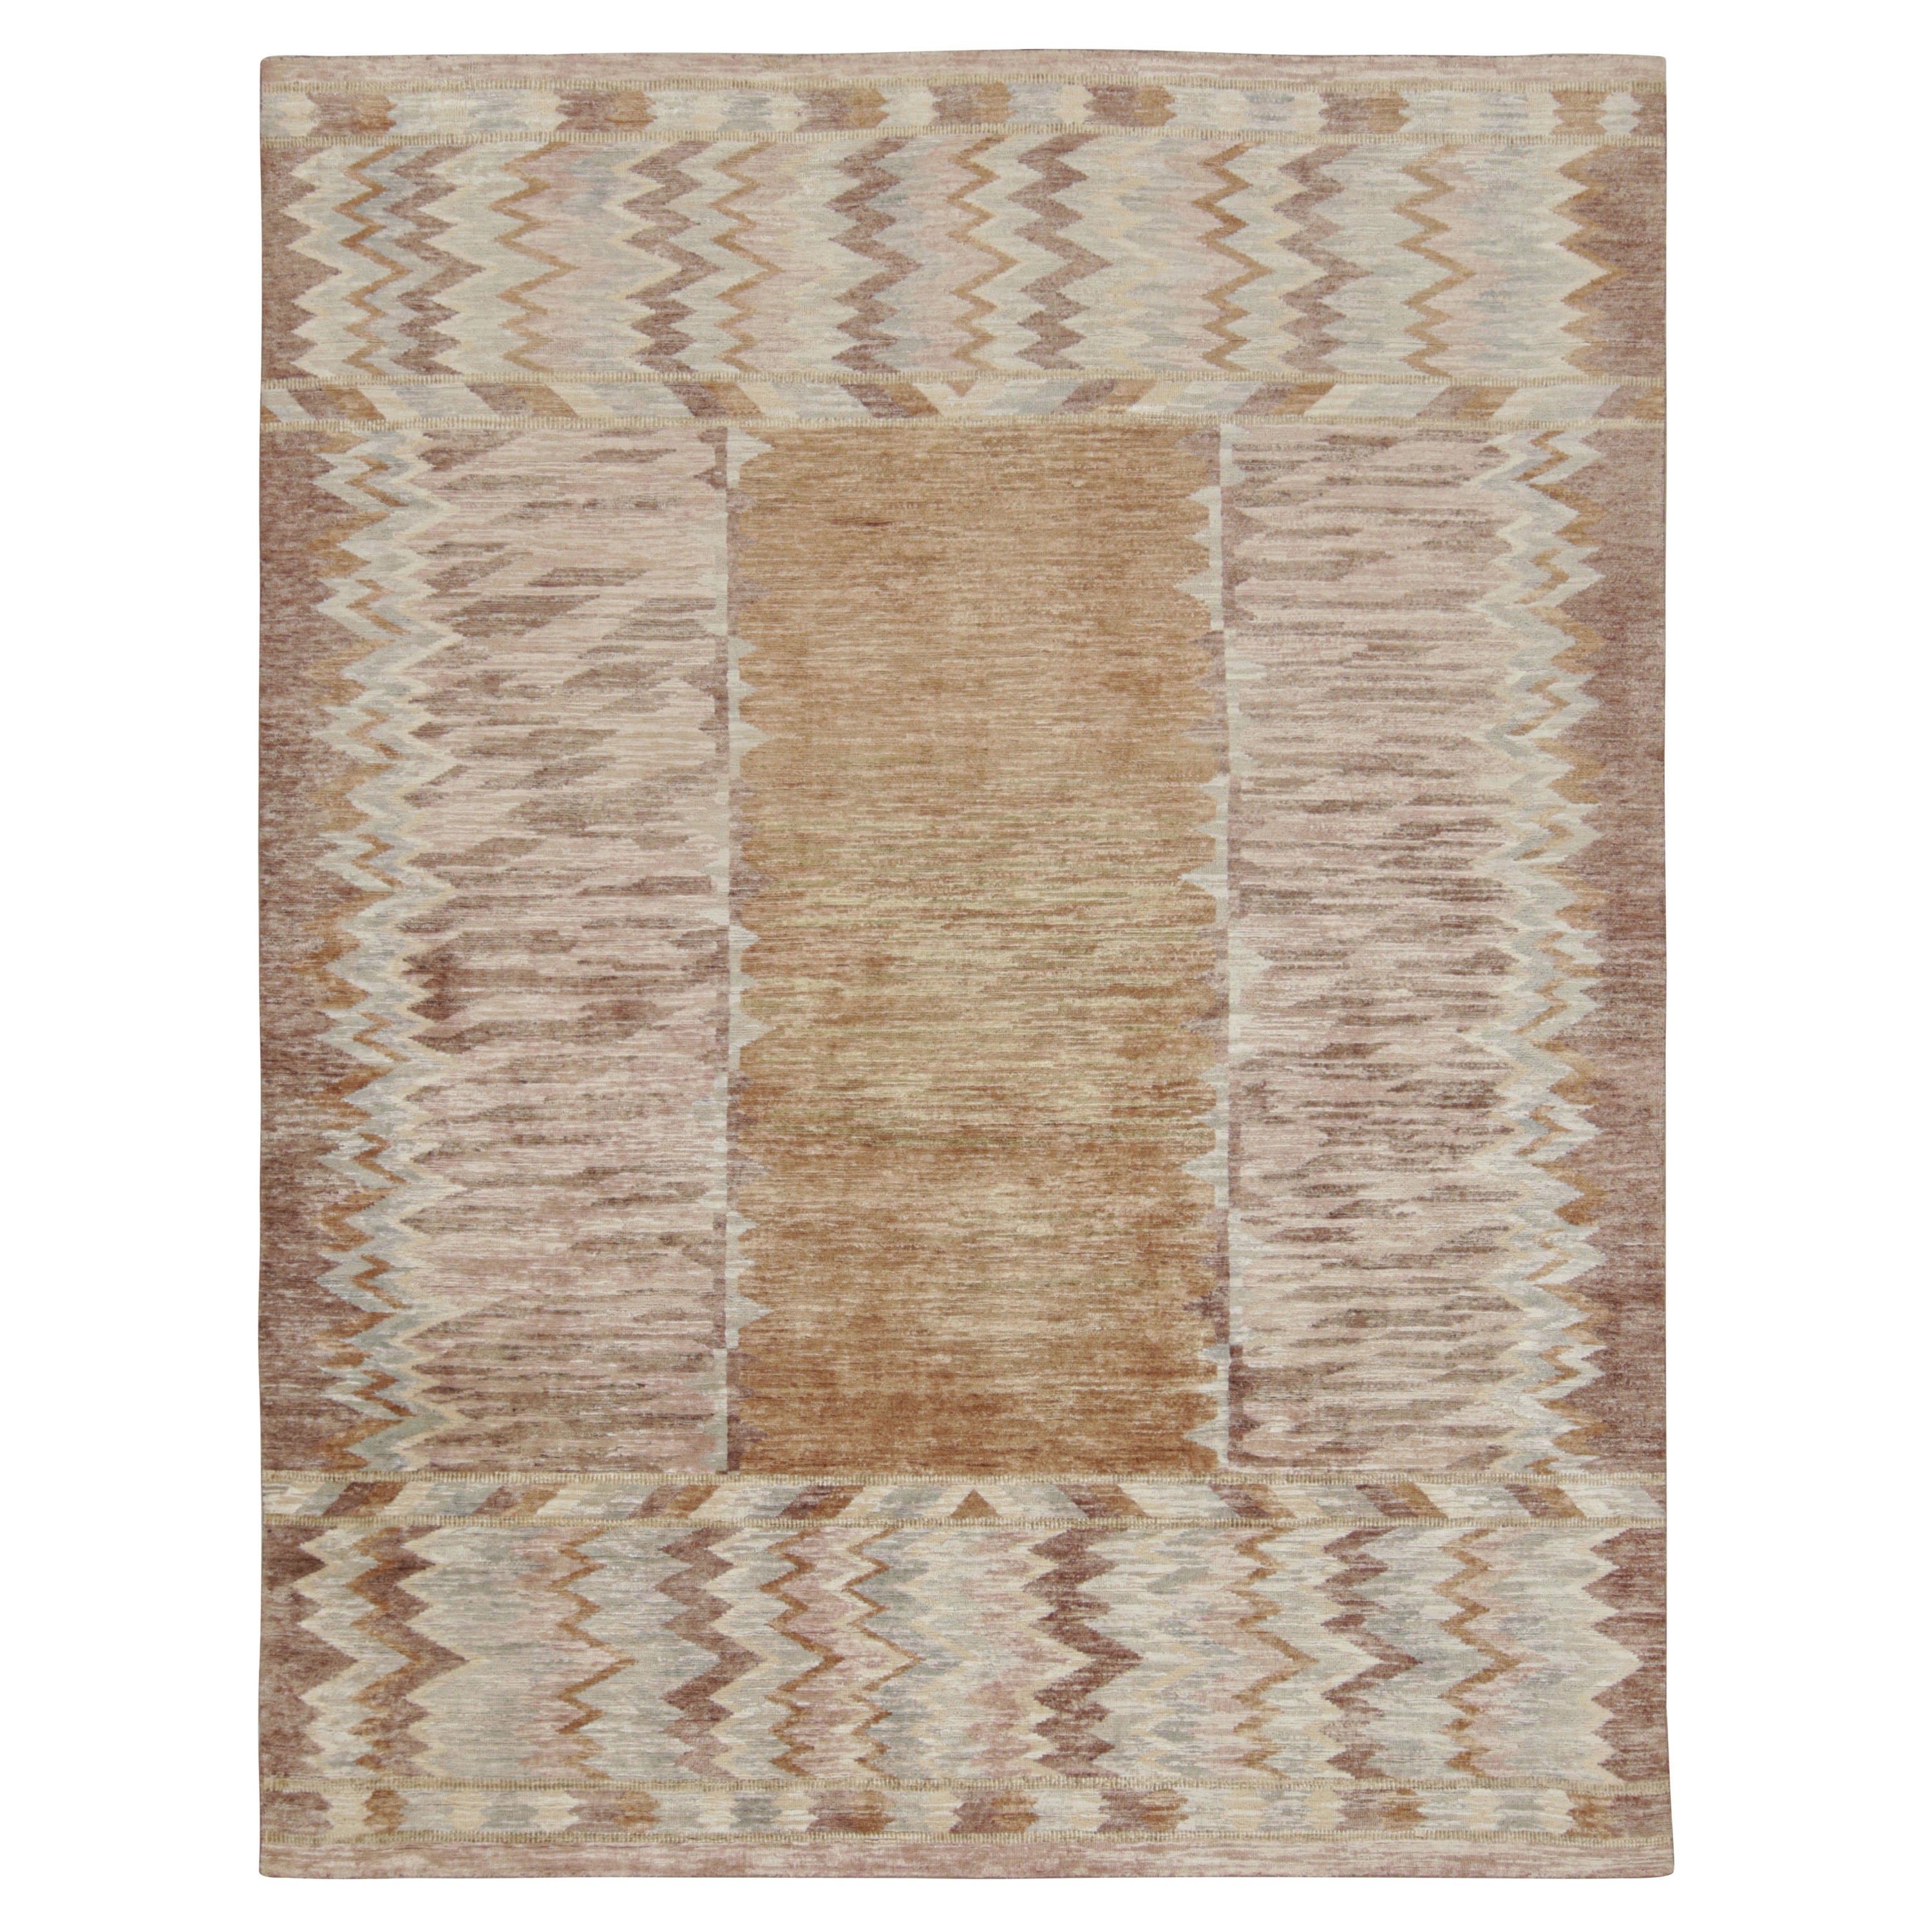 Rug & Kilim’s Scandinavian Style Rug with Geometric Chevron Patterns For Sale